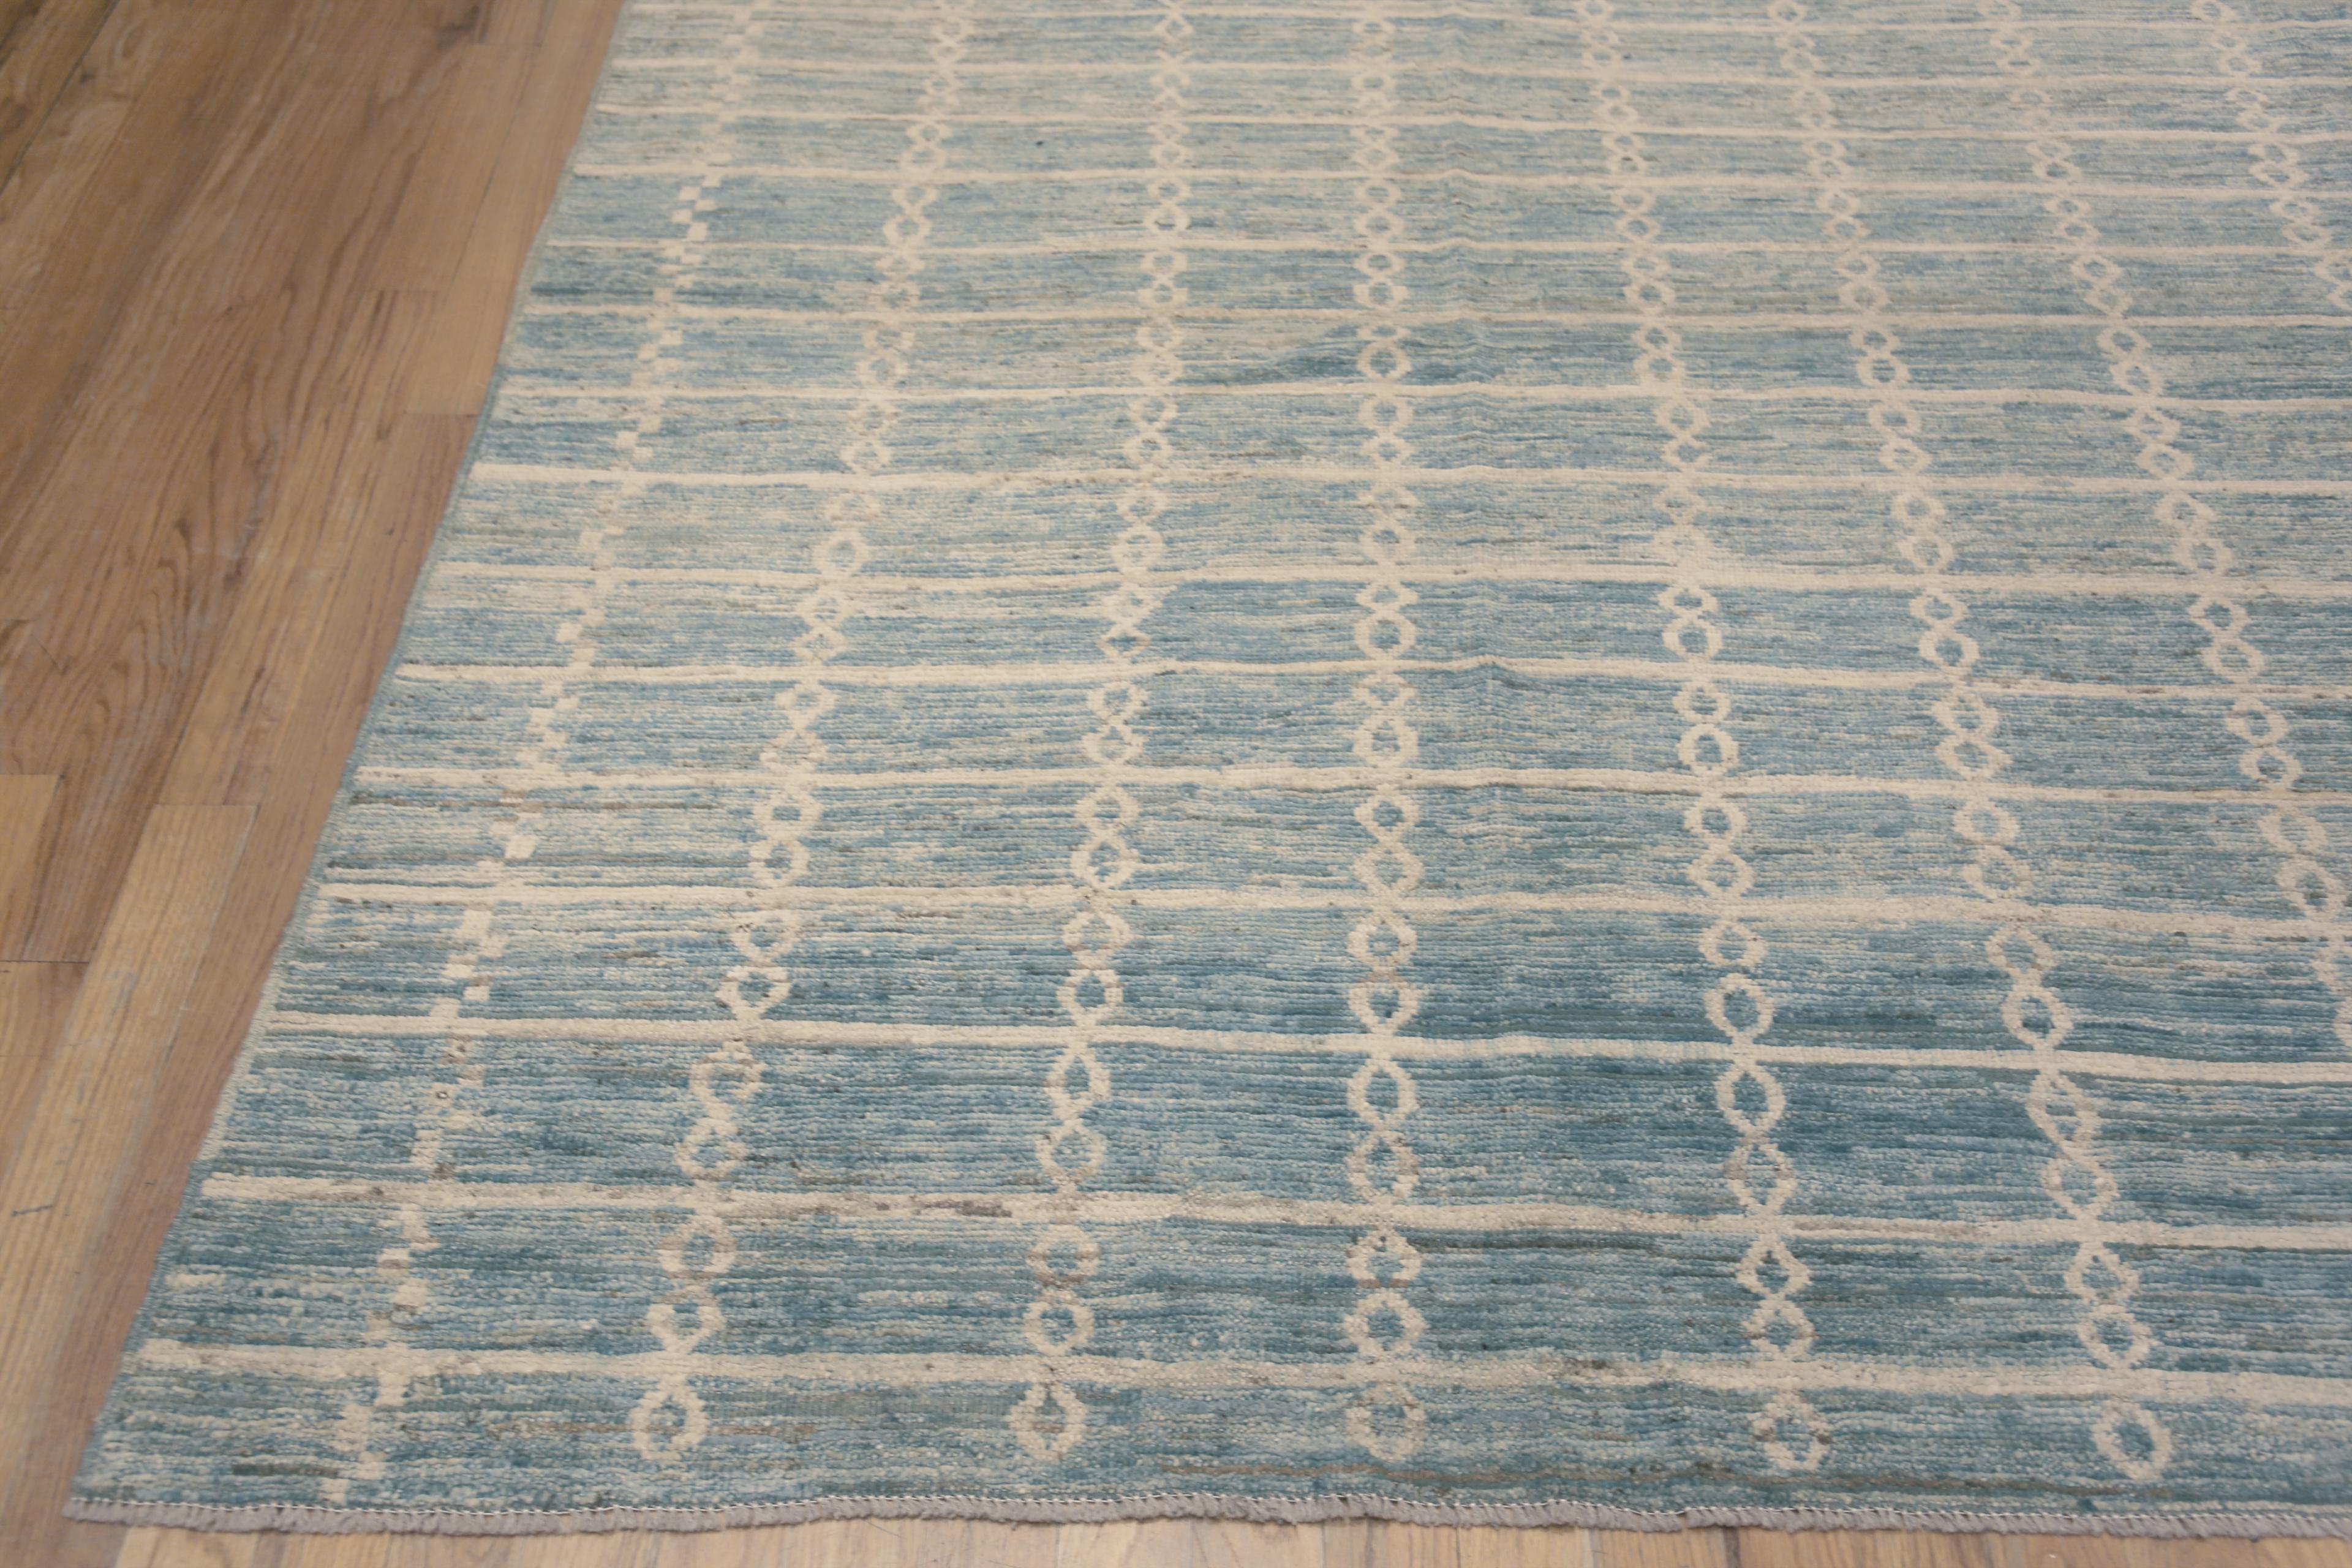 Contemporary Nazmiyal Collection Soft Wool Pile Handmade Allover Modern Rug 12'9